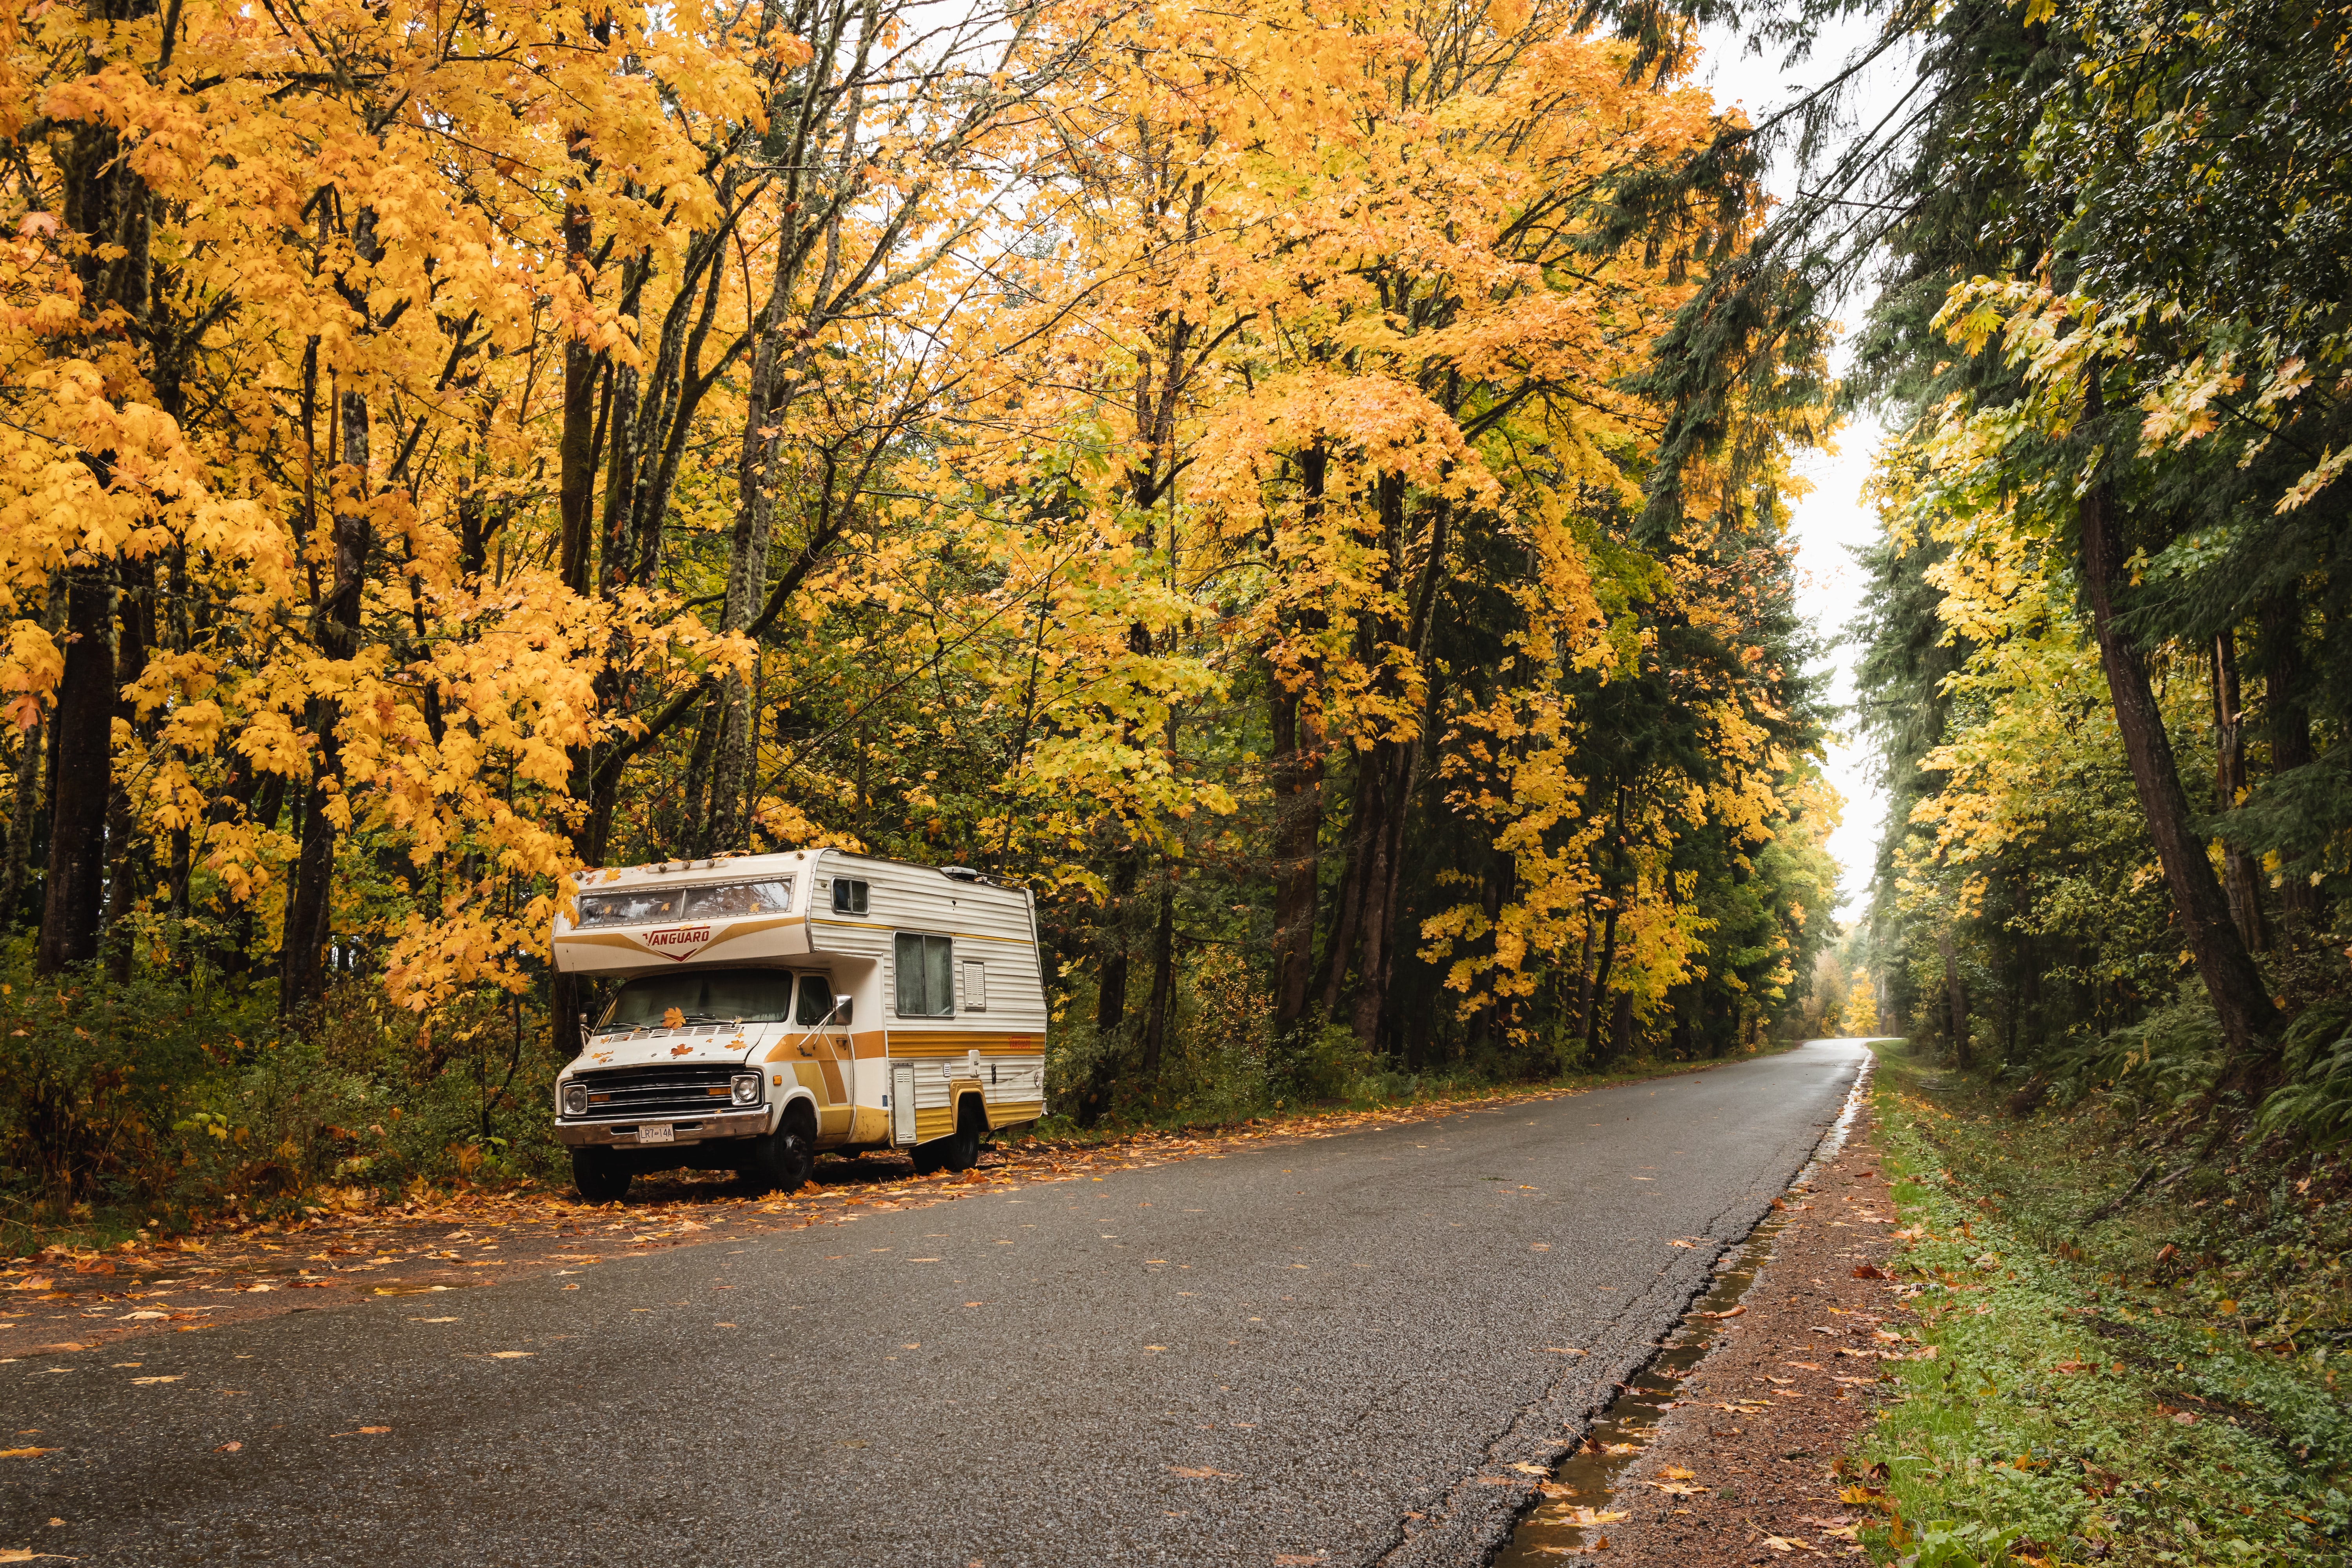 RV Parked on the side of the road in Autumn